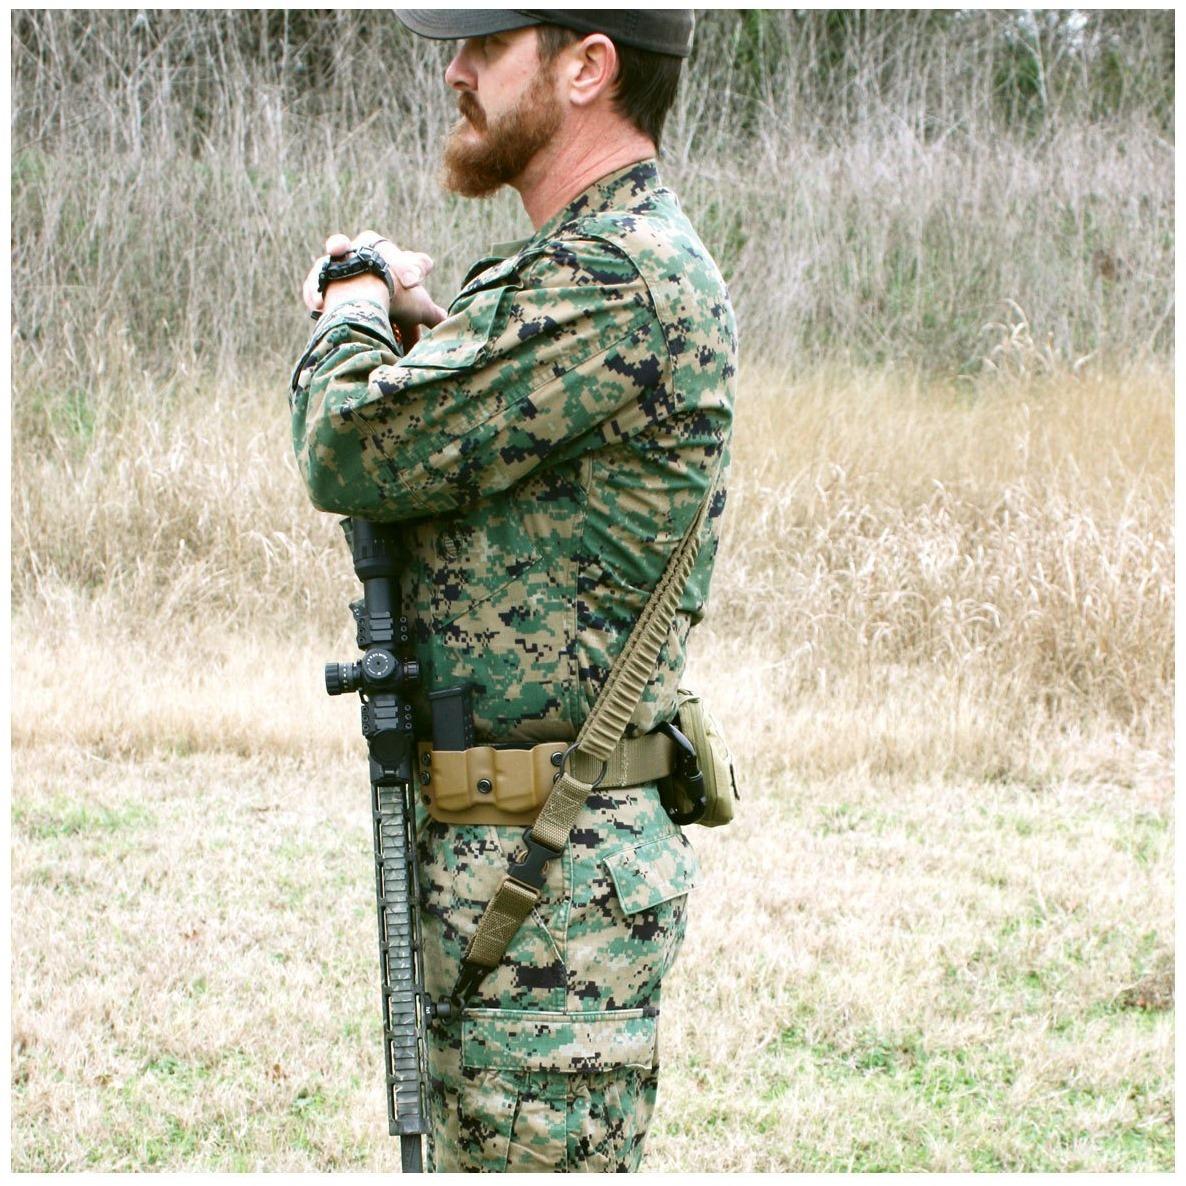 United States Tactical Tactical Gear United States Tactical C4: 2-to-1 Point Shock Webbing Sling